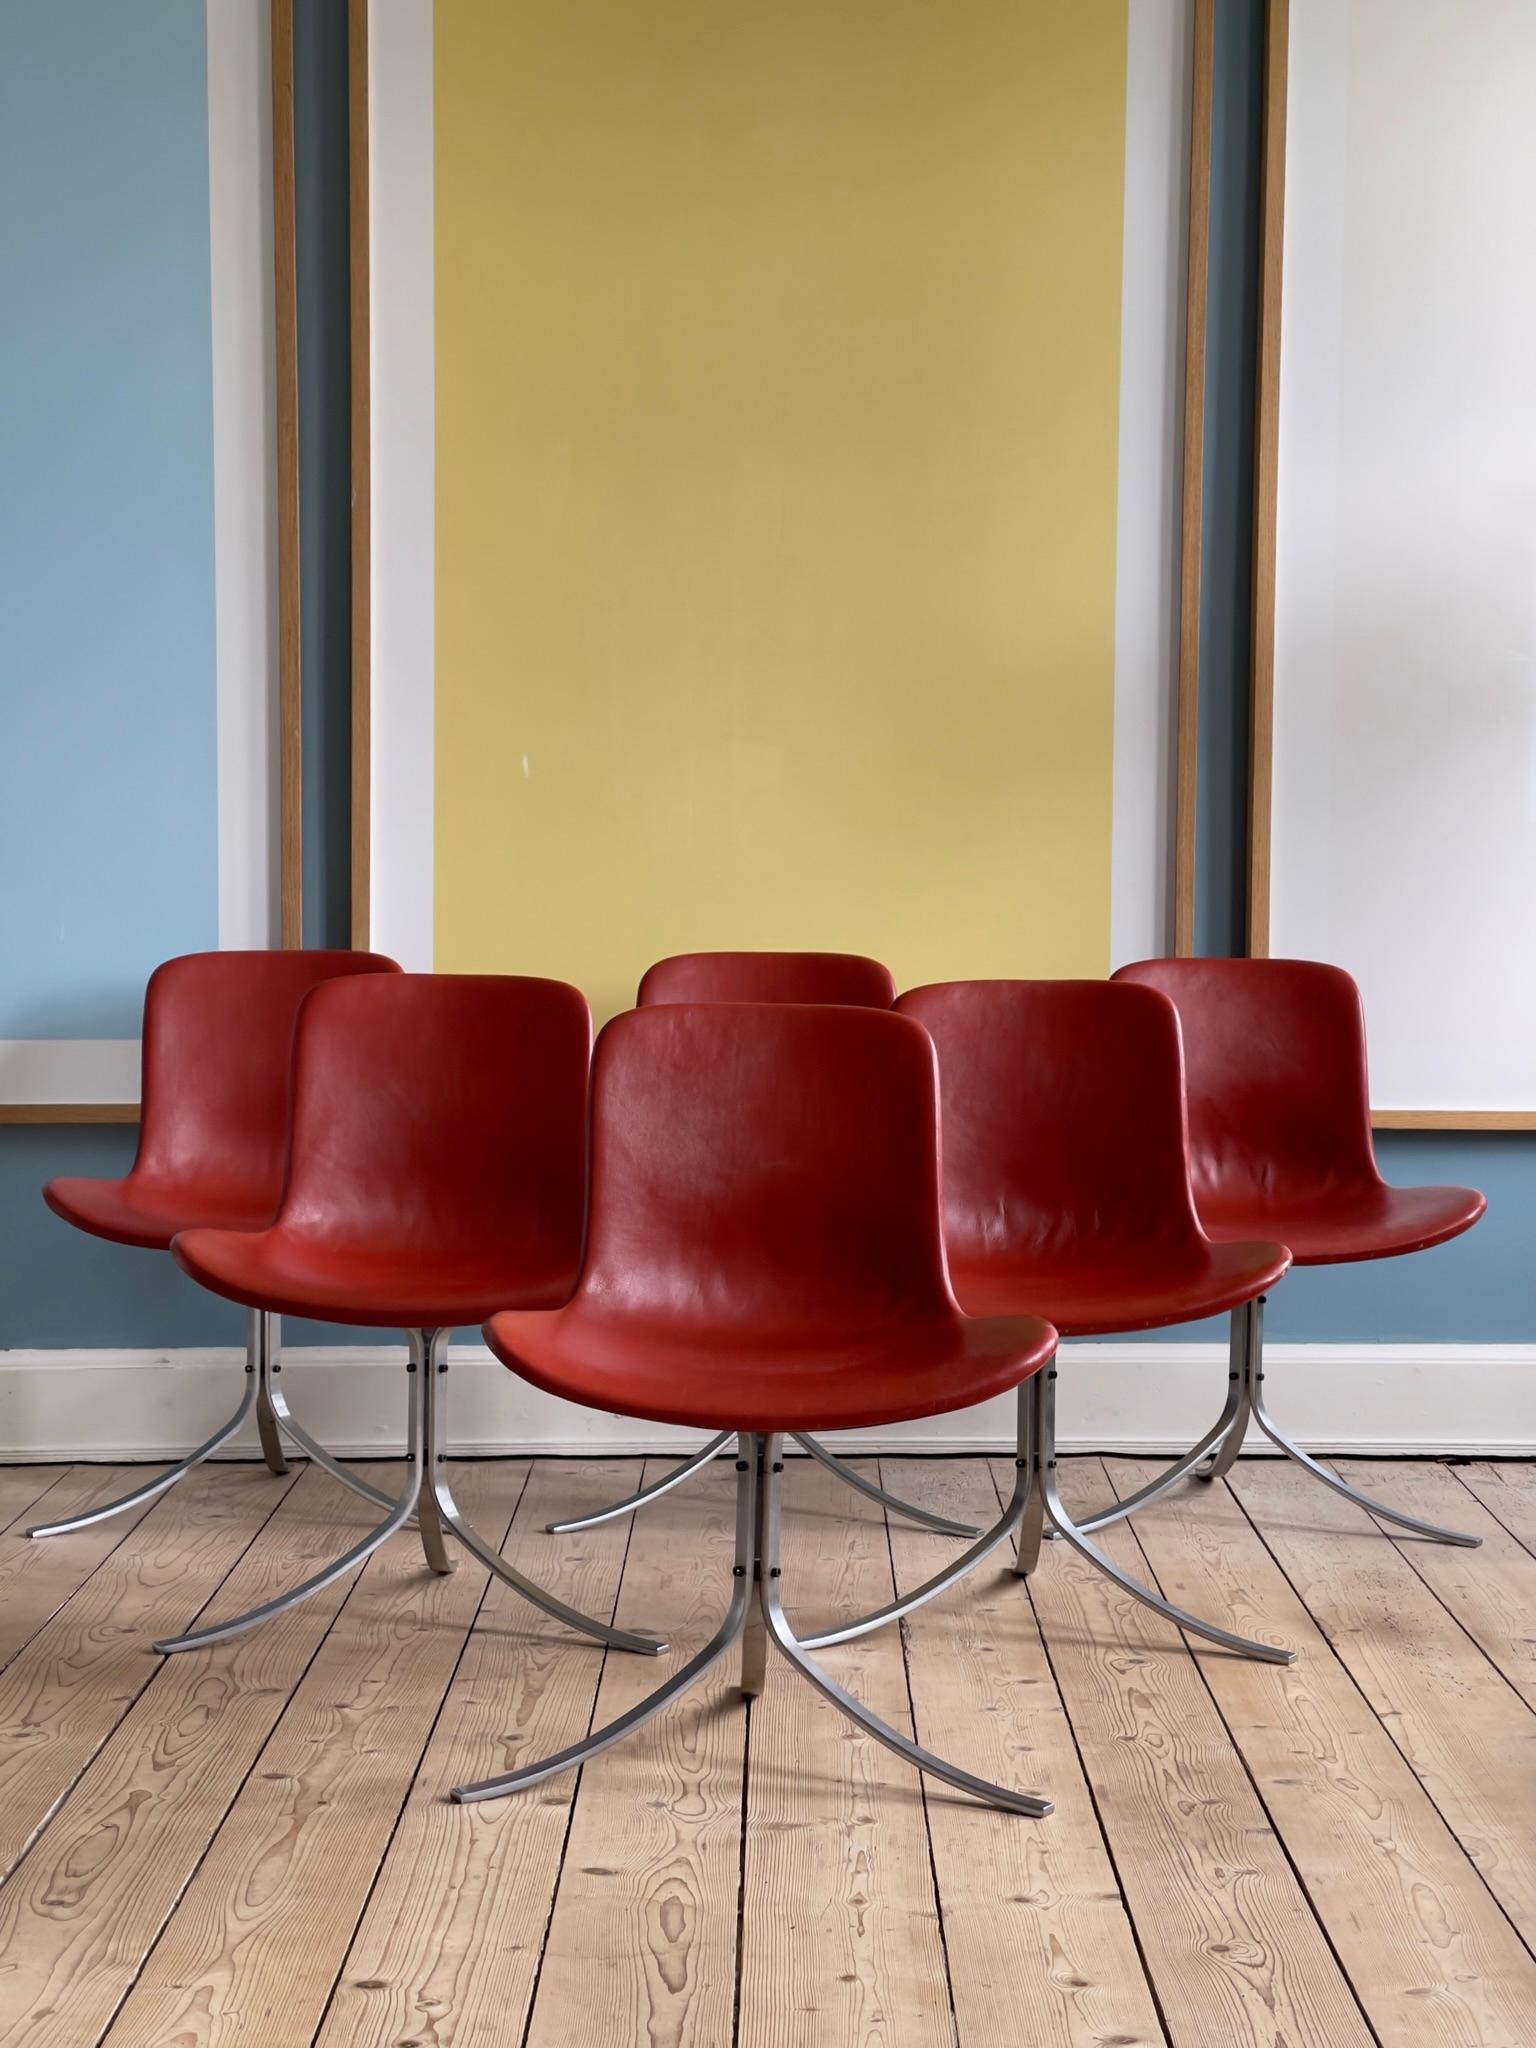 A suite of 6 beautifully patinated dining chairs PK 9 design by Poul Kjaerholm in 1960. It's construction is made of spring steel, the seating is covered with burgundy red leather. Labeled Fritz Hansen.

